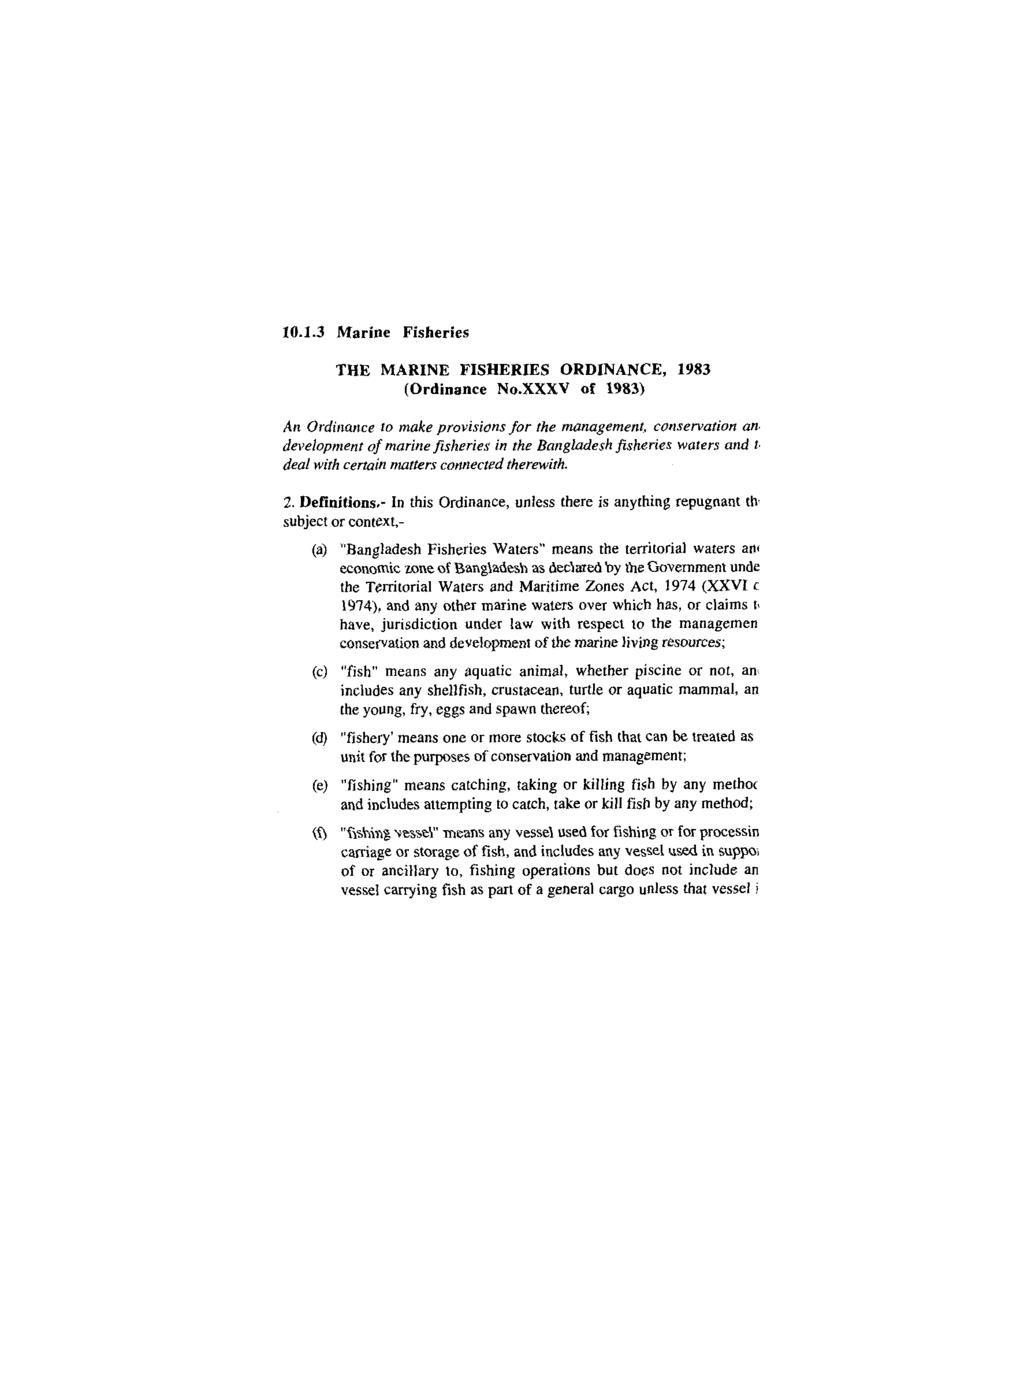 10.1.3 Marine Fisheries THE MARINE FISHERIES ORDINANCE, 1983 (Ordinance No.XXXV of 1983) An Ordinance to make provisions for the management. conservation an.